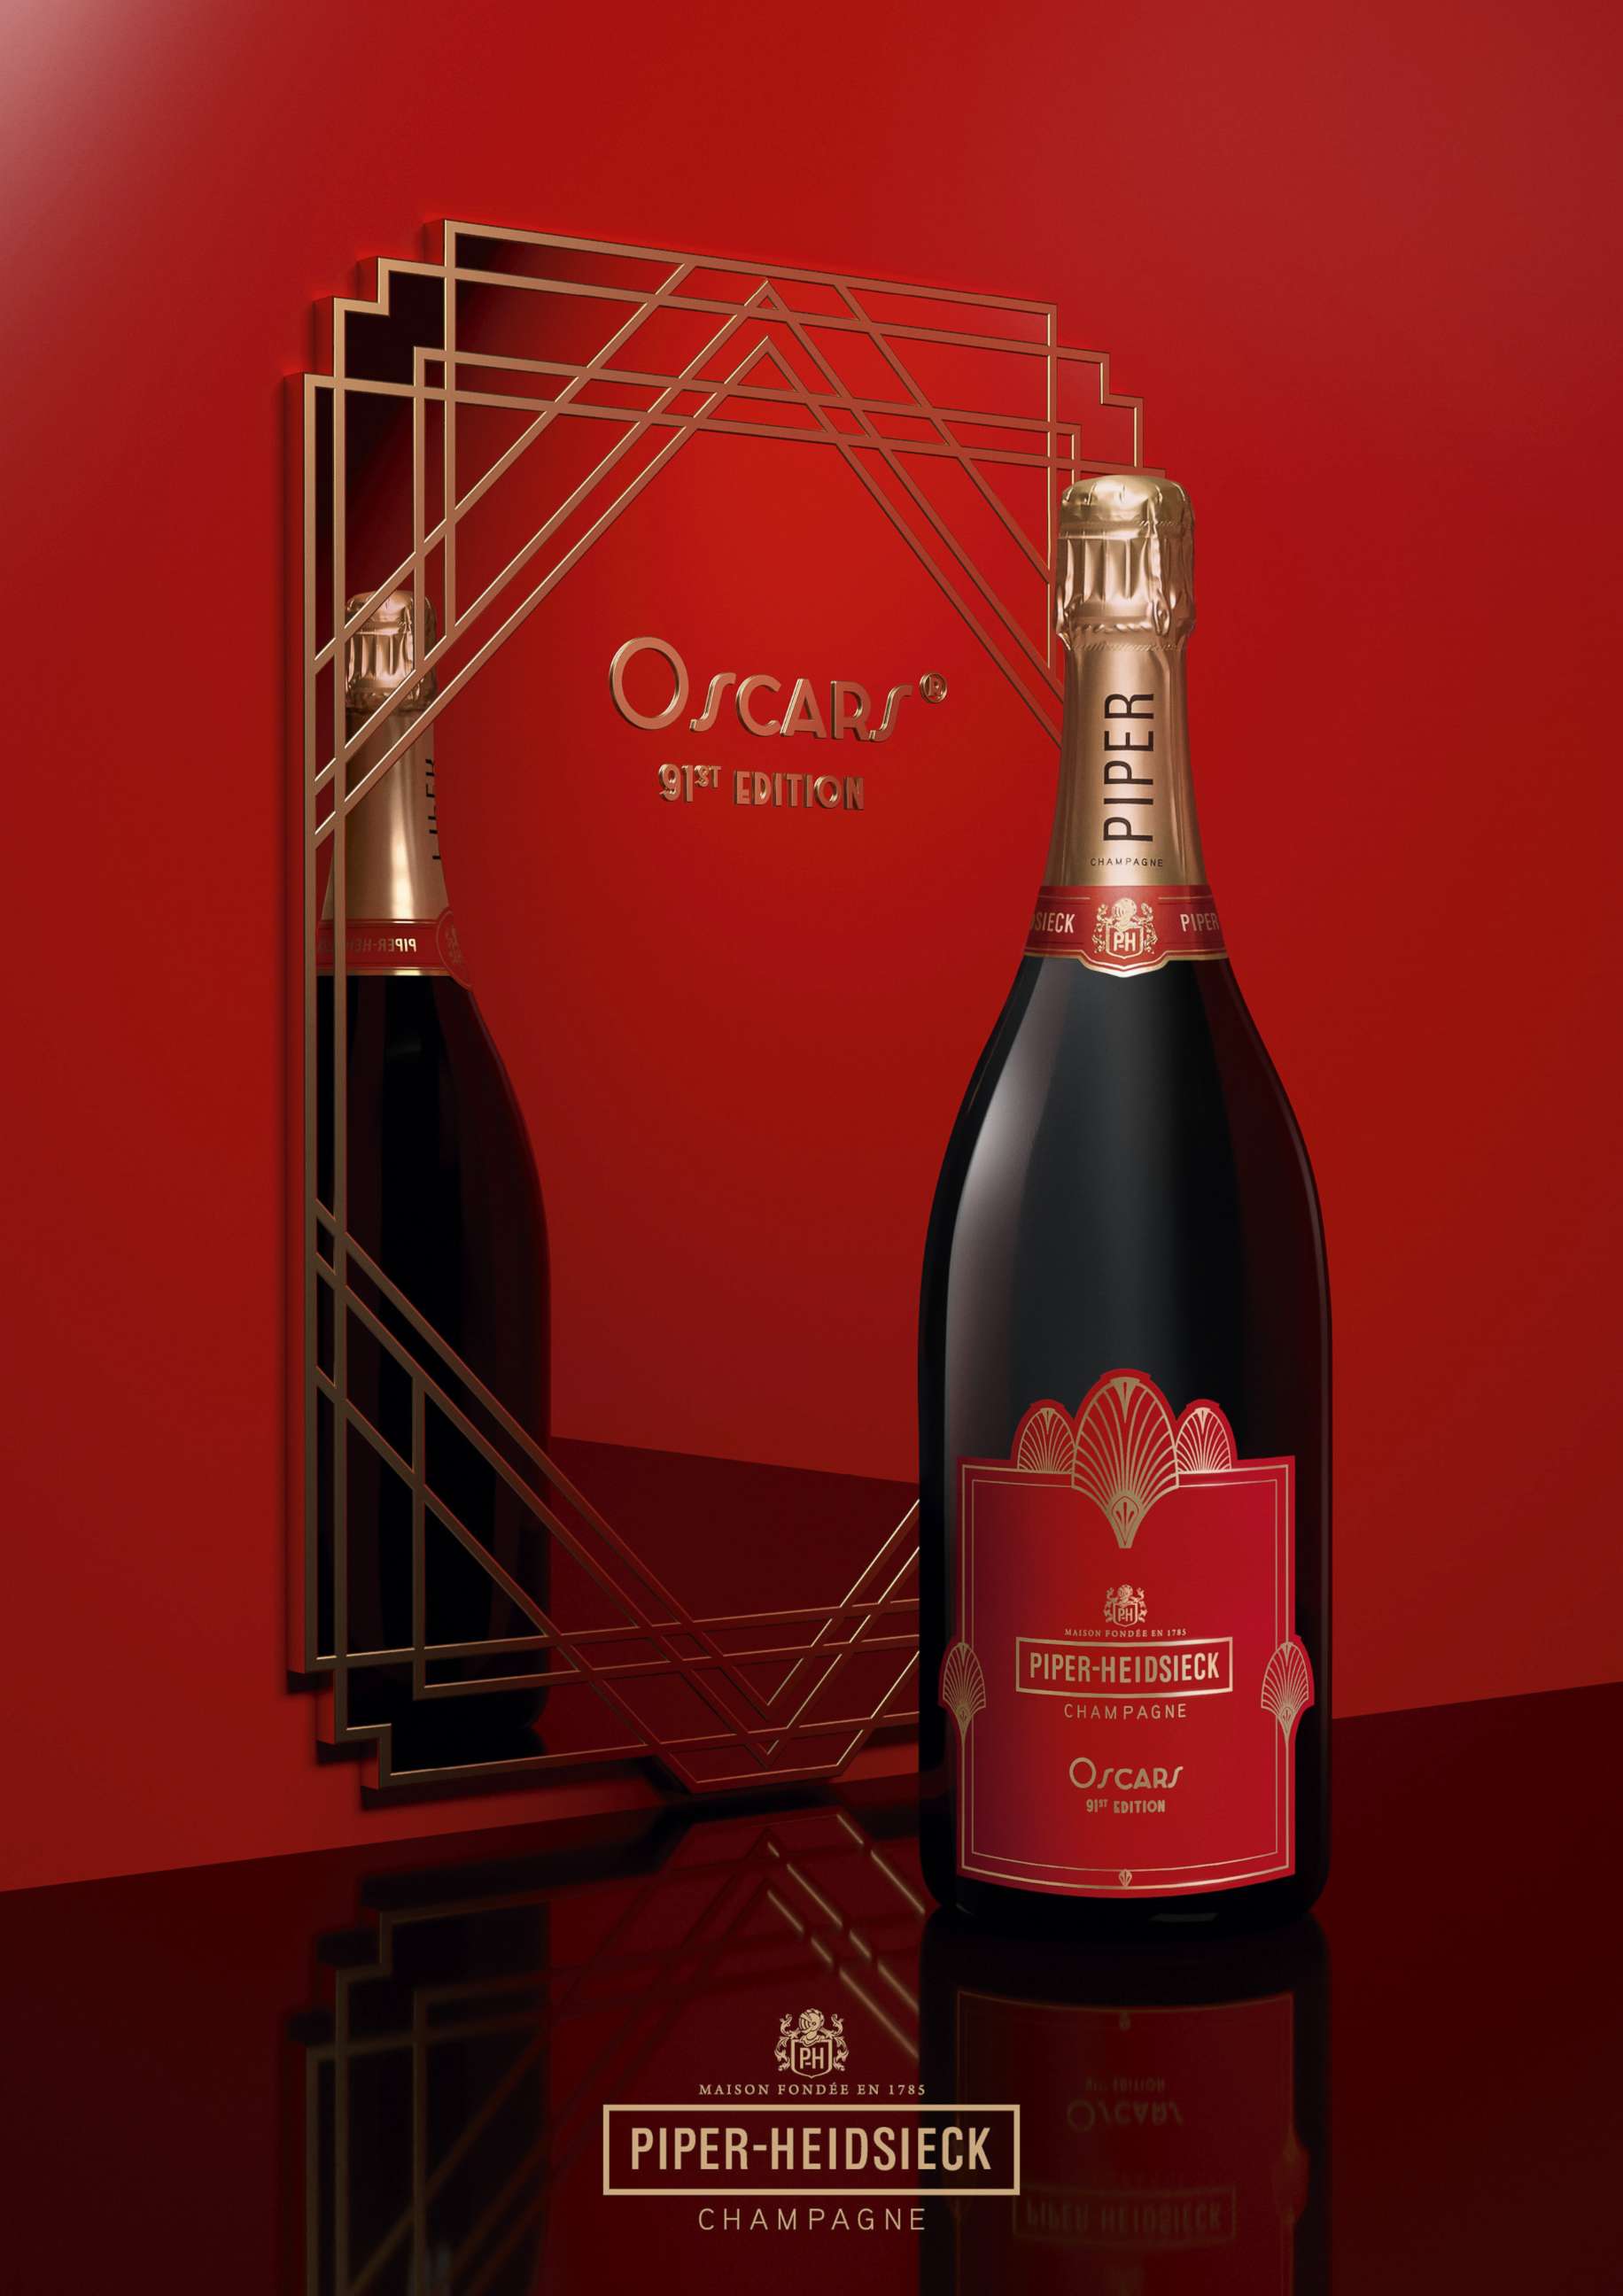 PHOTO: The French Champagne house Piper-Heidsieck created a custom, limited-edition magnum for the 91st Academy Awards.